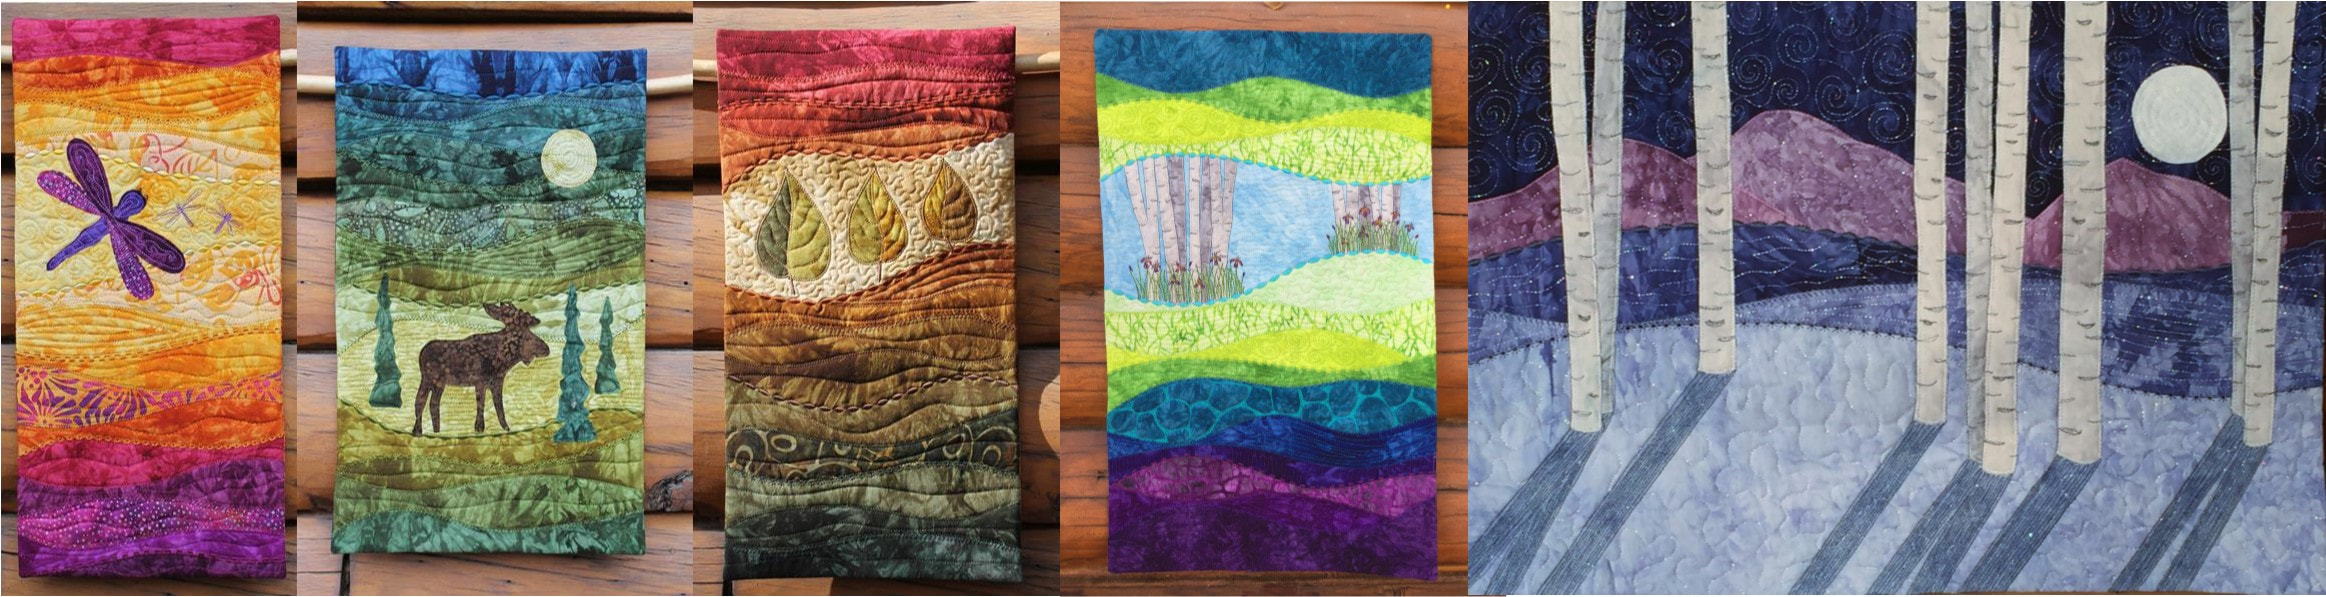 Wall Hanging Art Quilts